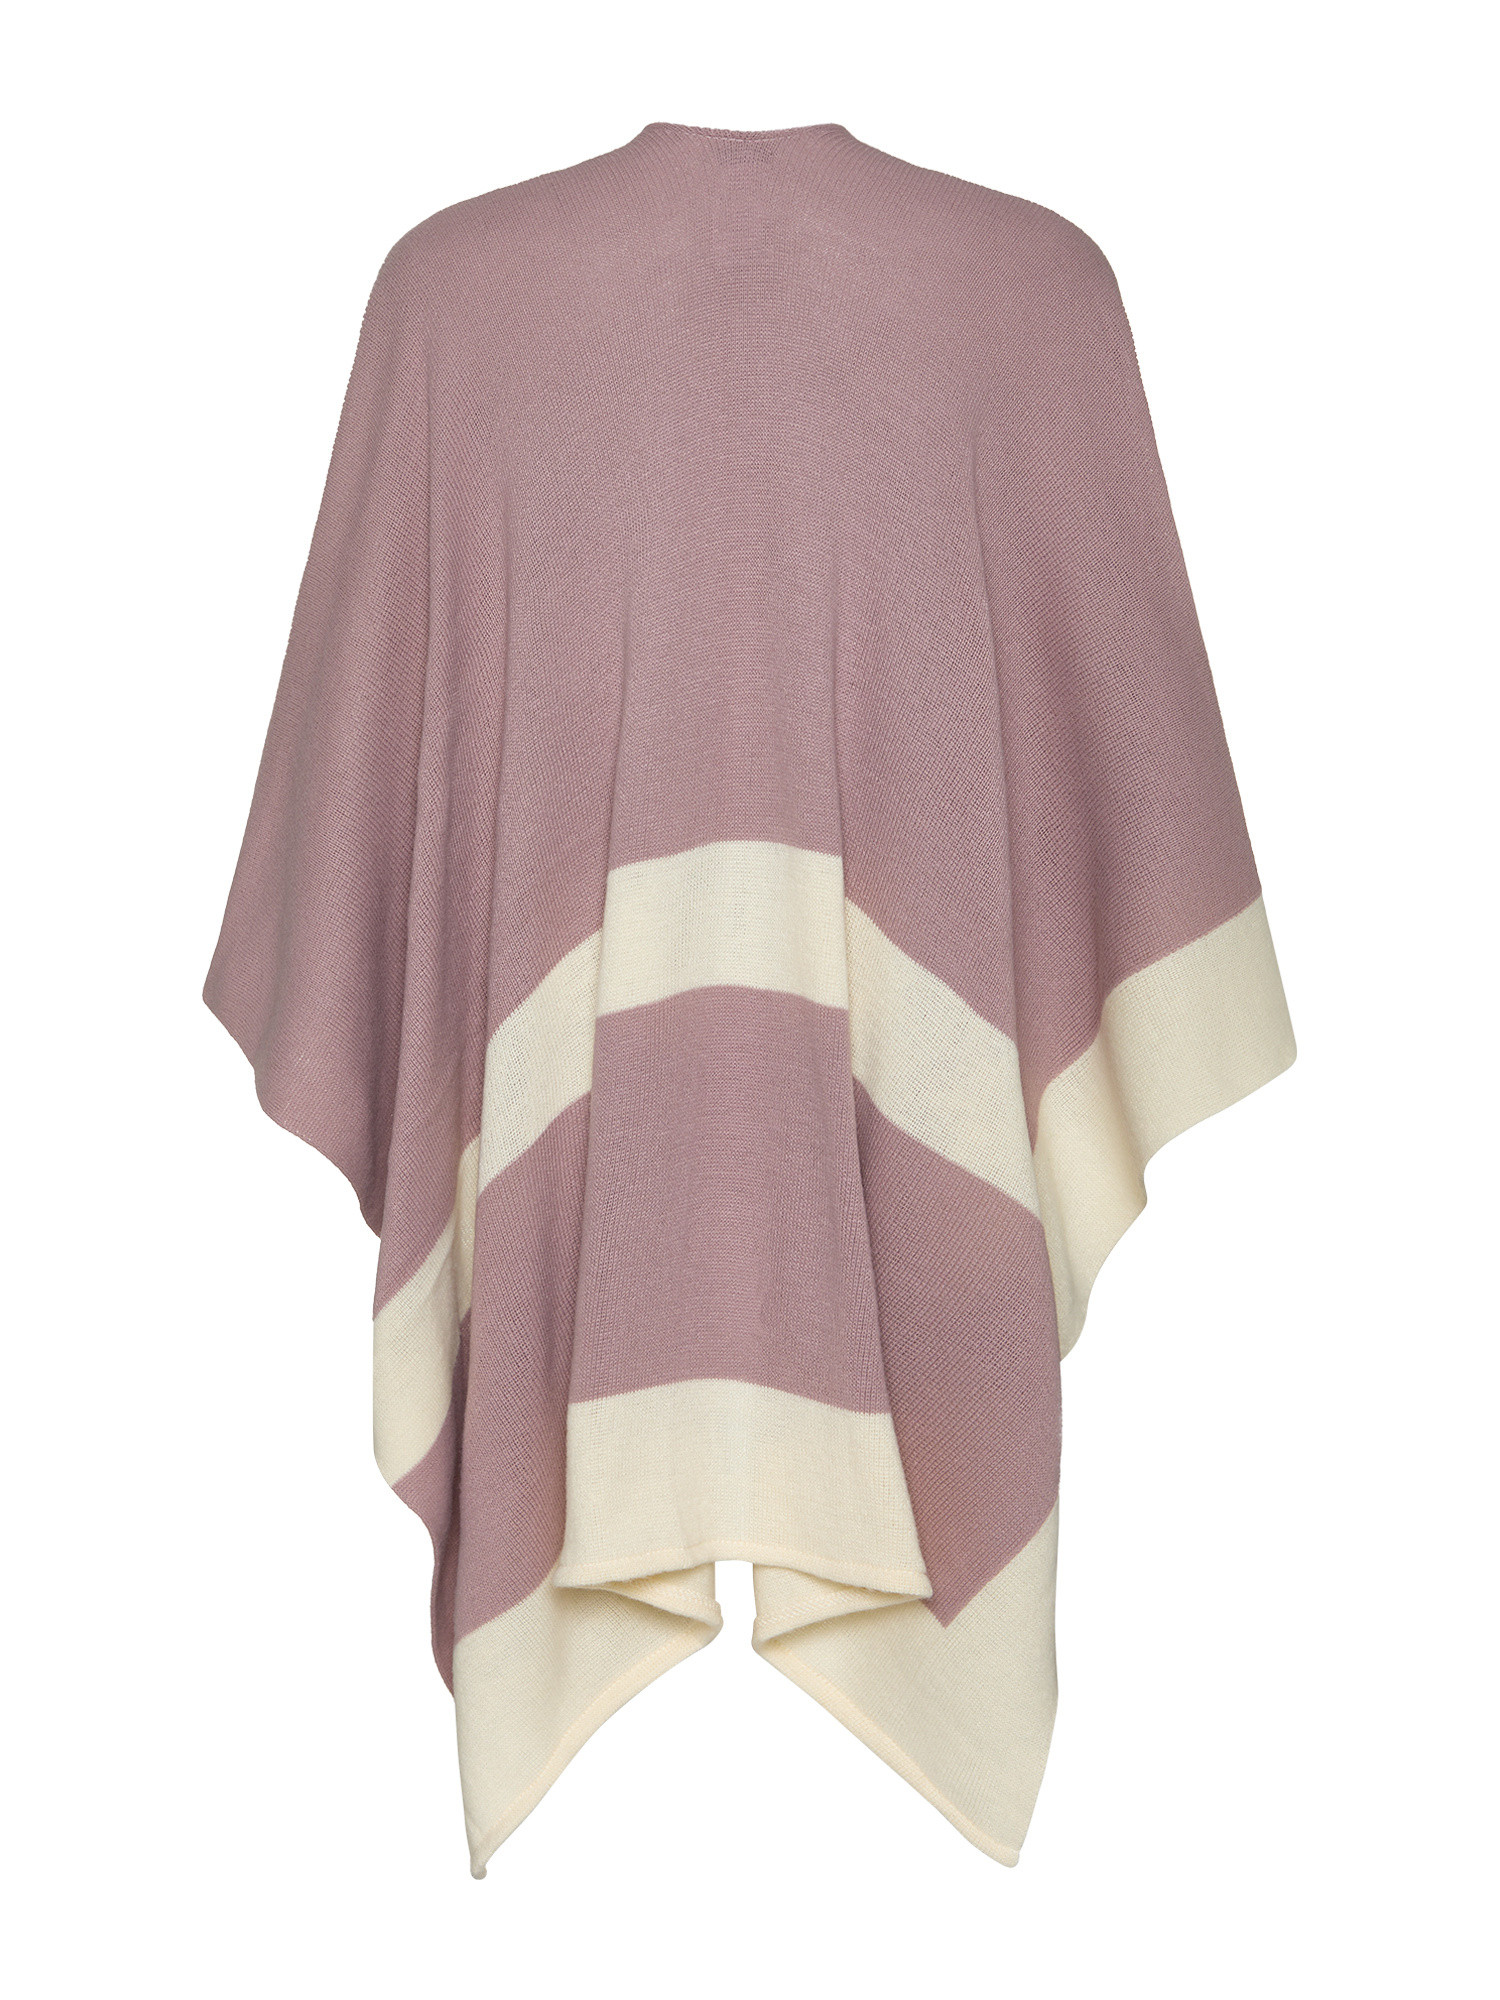 Koan - Two-tone knitted poncho, Pink, large image number 1